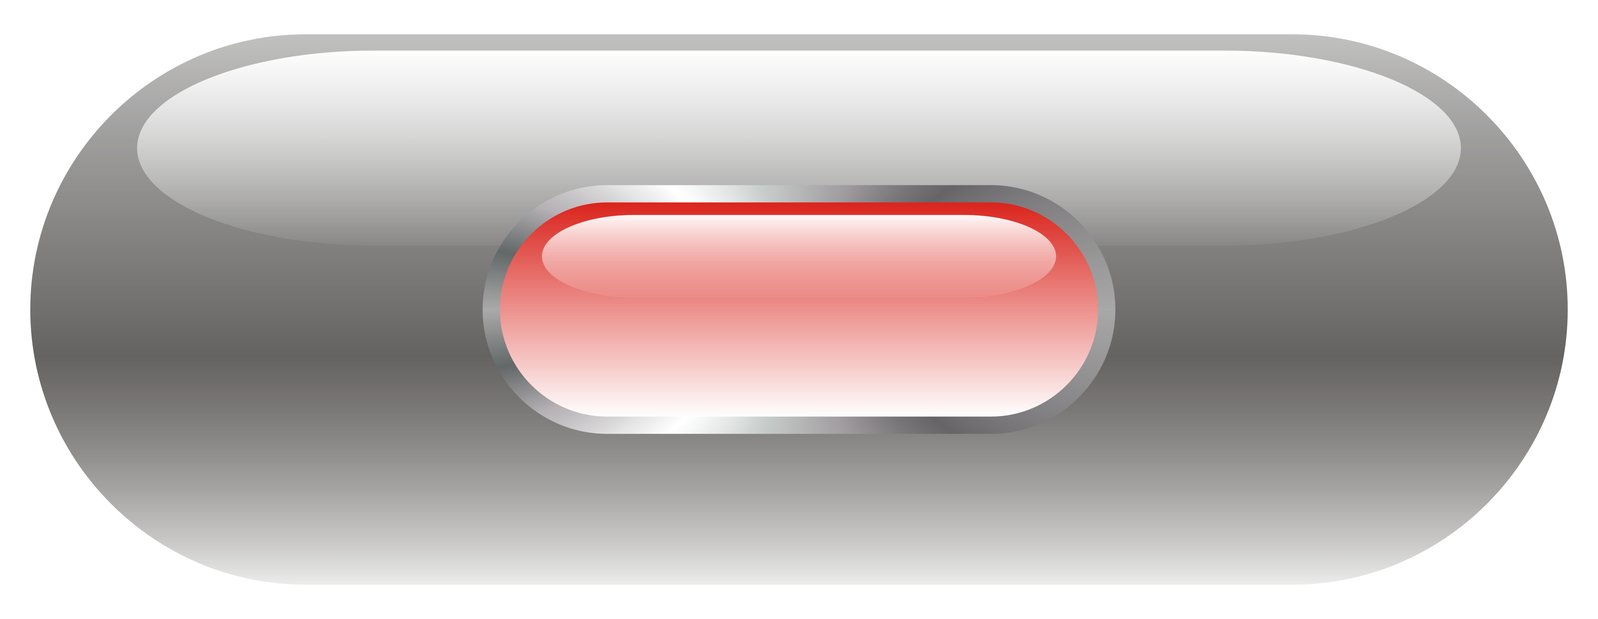 a silver rounded on with a red center